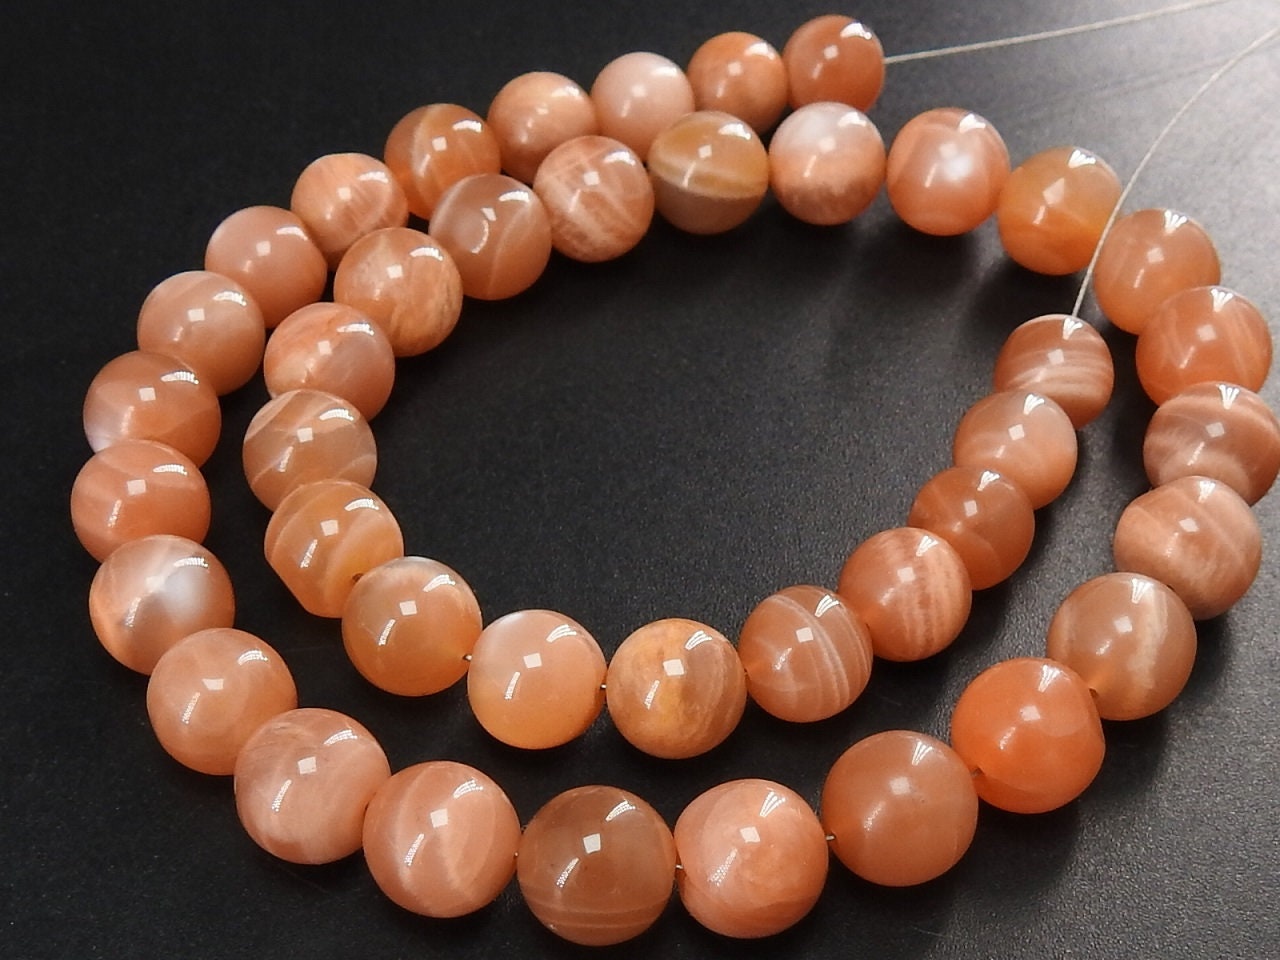 Peach Moonstone Smooth Sphere Ball Bead,Round Shape,Roundel,Handmade,Loose Stone,Wholesaler,Supplies,14Inch Strand 100%Natural (Pme)B7 | Save 33% - Rajasthan Living 15